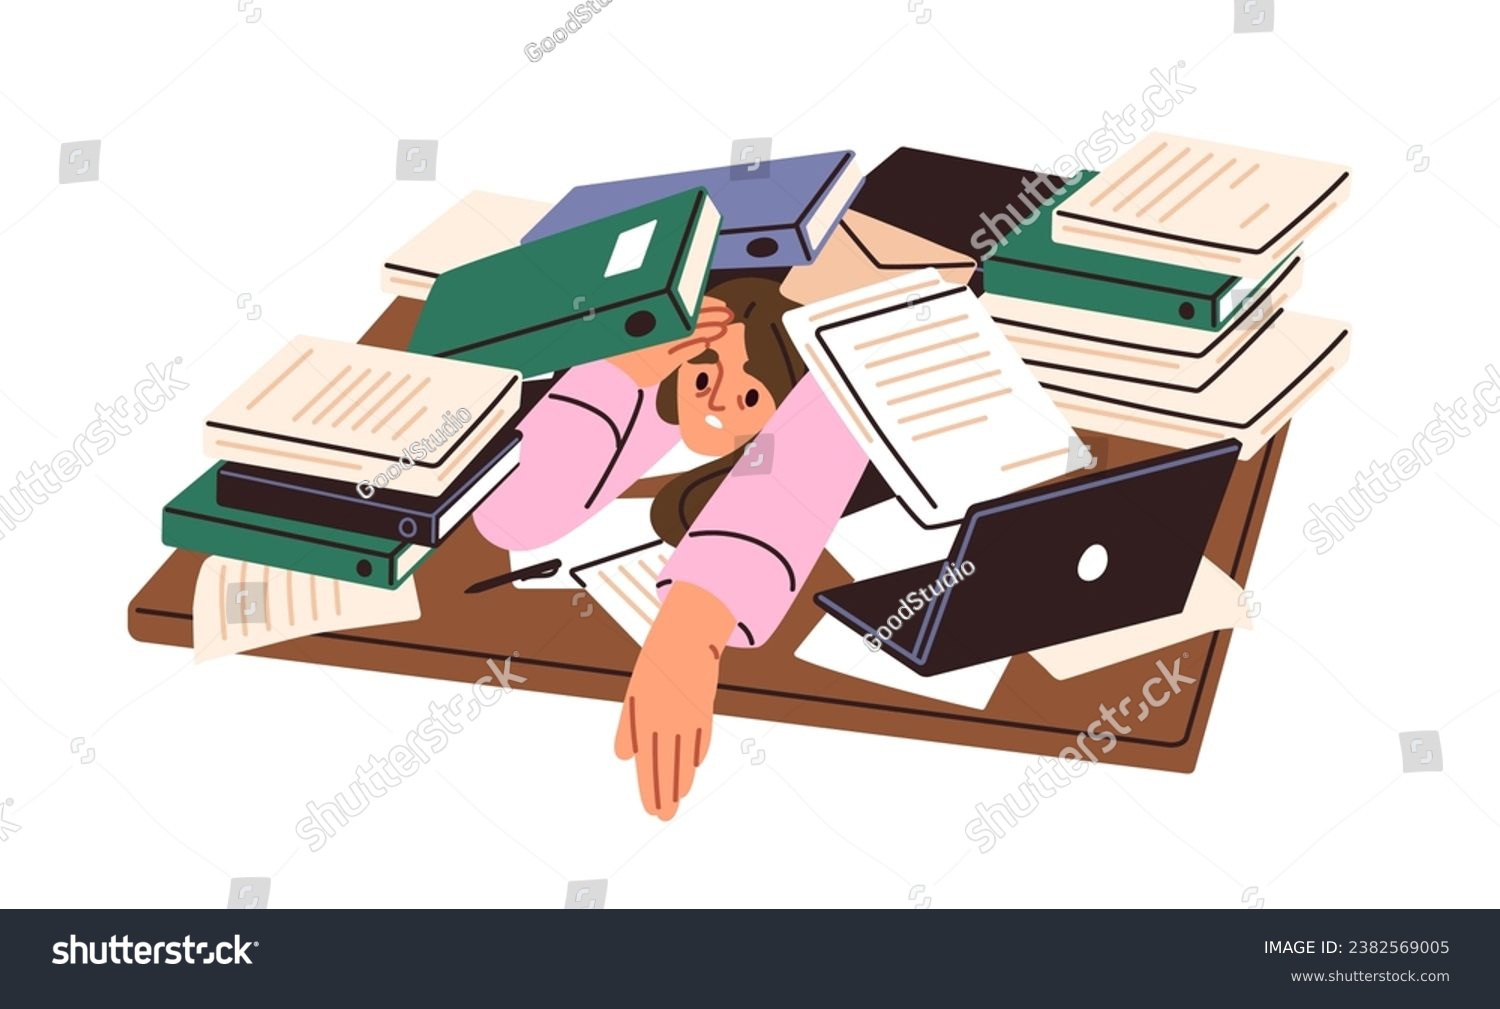 Busy tired employee on desk under many papers, overloaded with documents. Excessive workload, business burden, paperwork, overwork concept. Flat vector illustration isolated on white background #2382569005